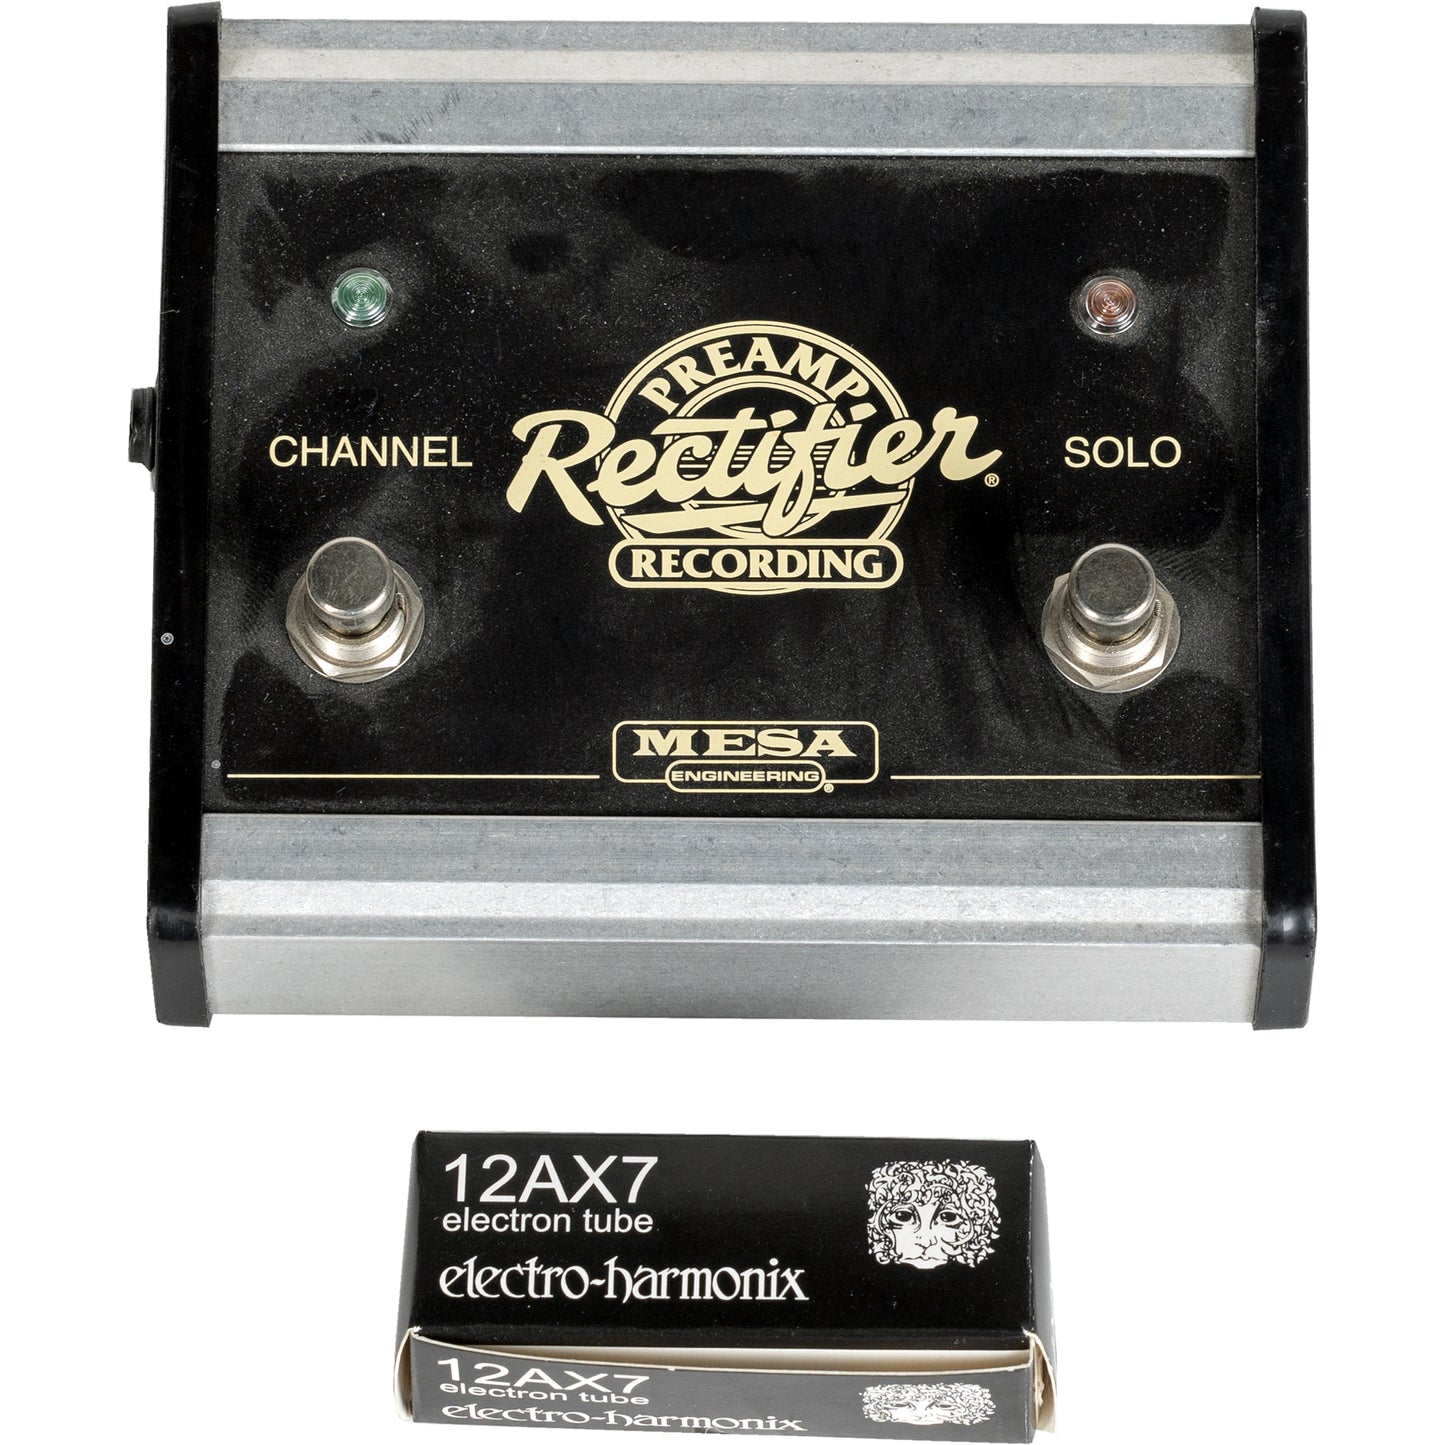 Mesa Boogie Rectifier Recording Preamp - with Footswitch